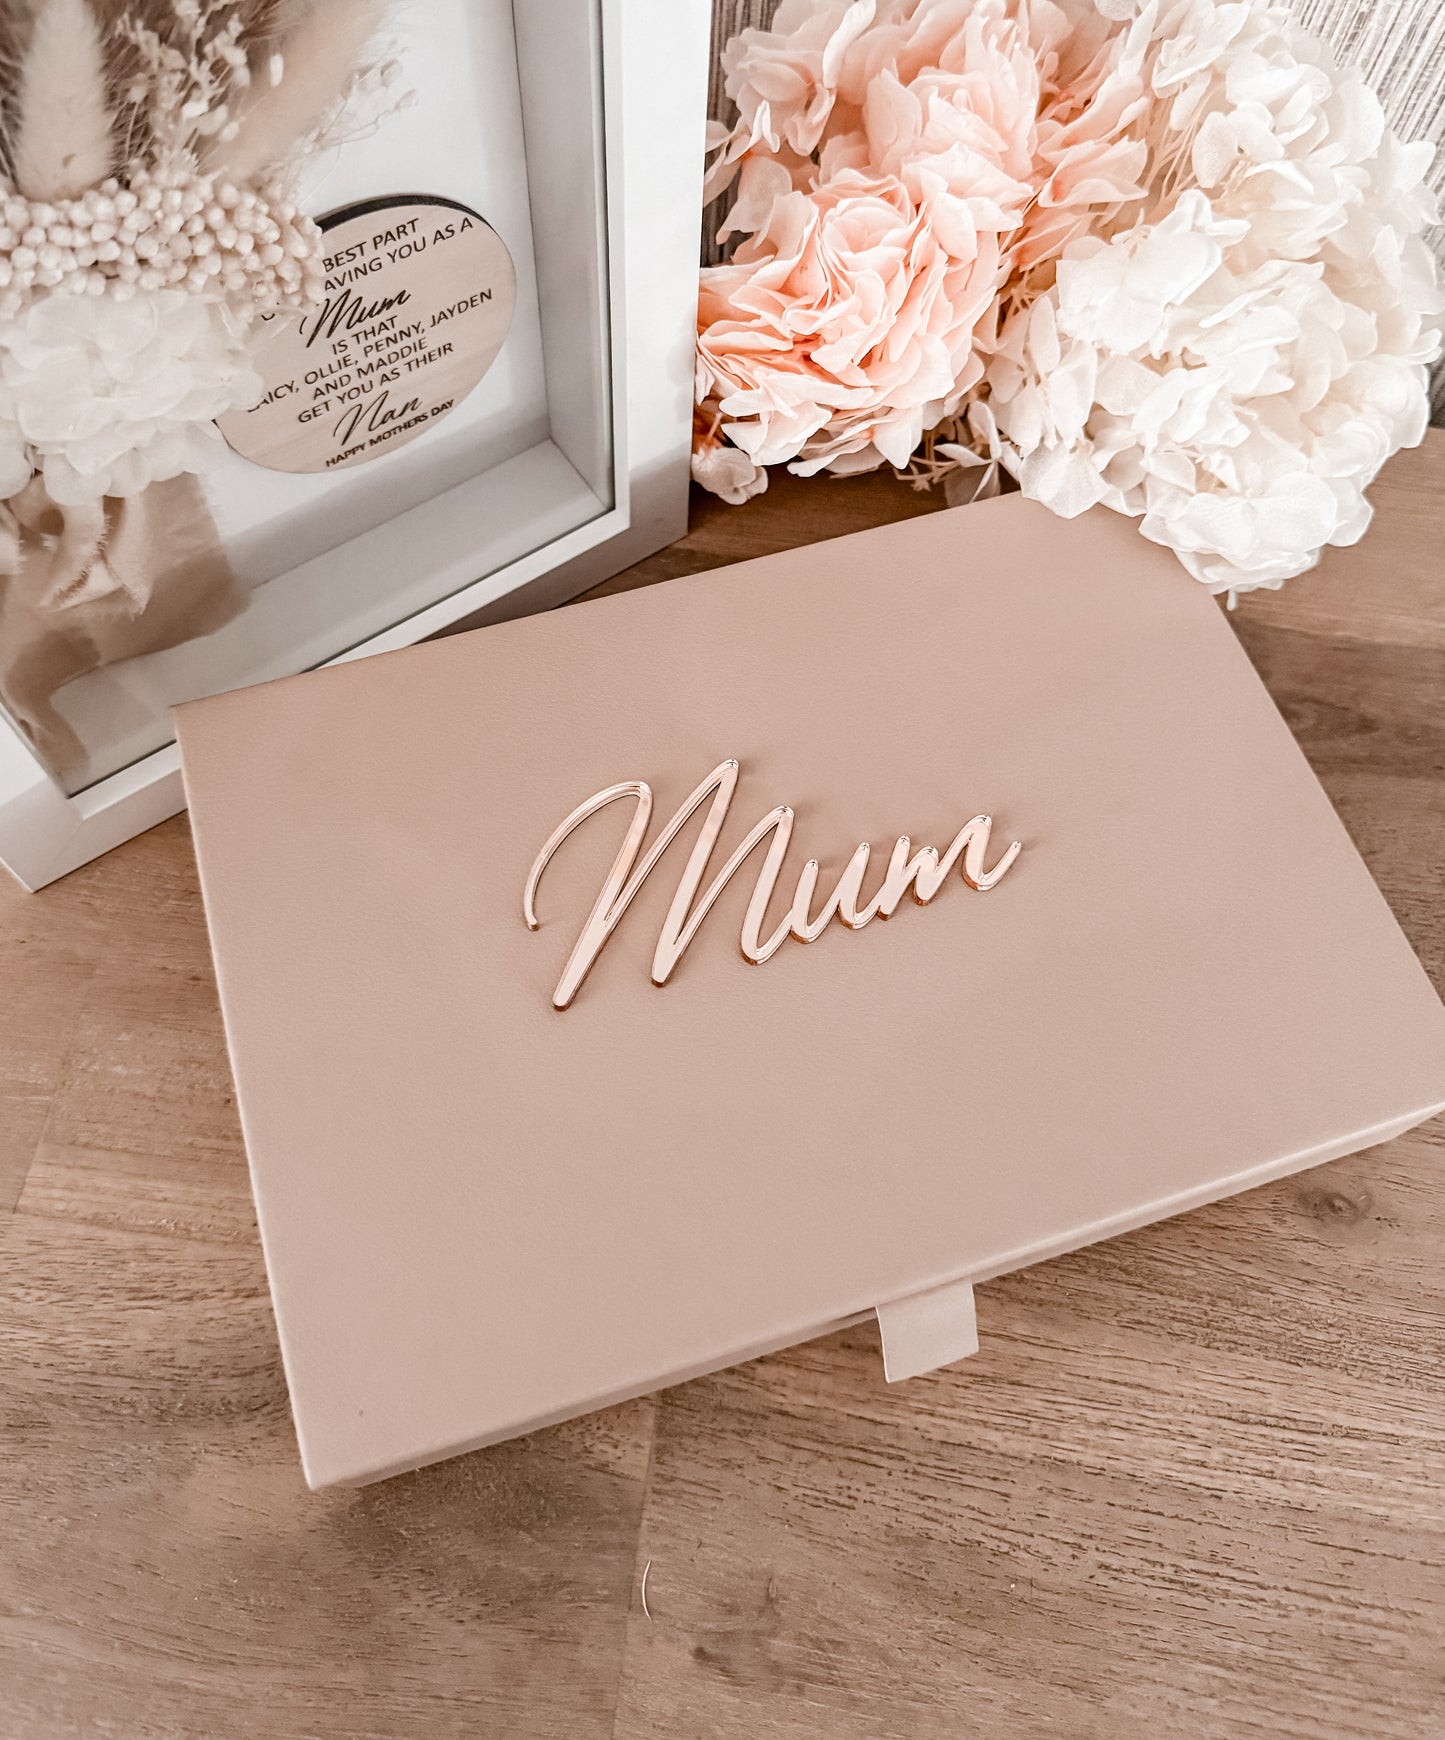 Mother’s Day jewellery box